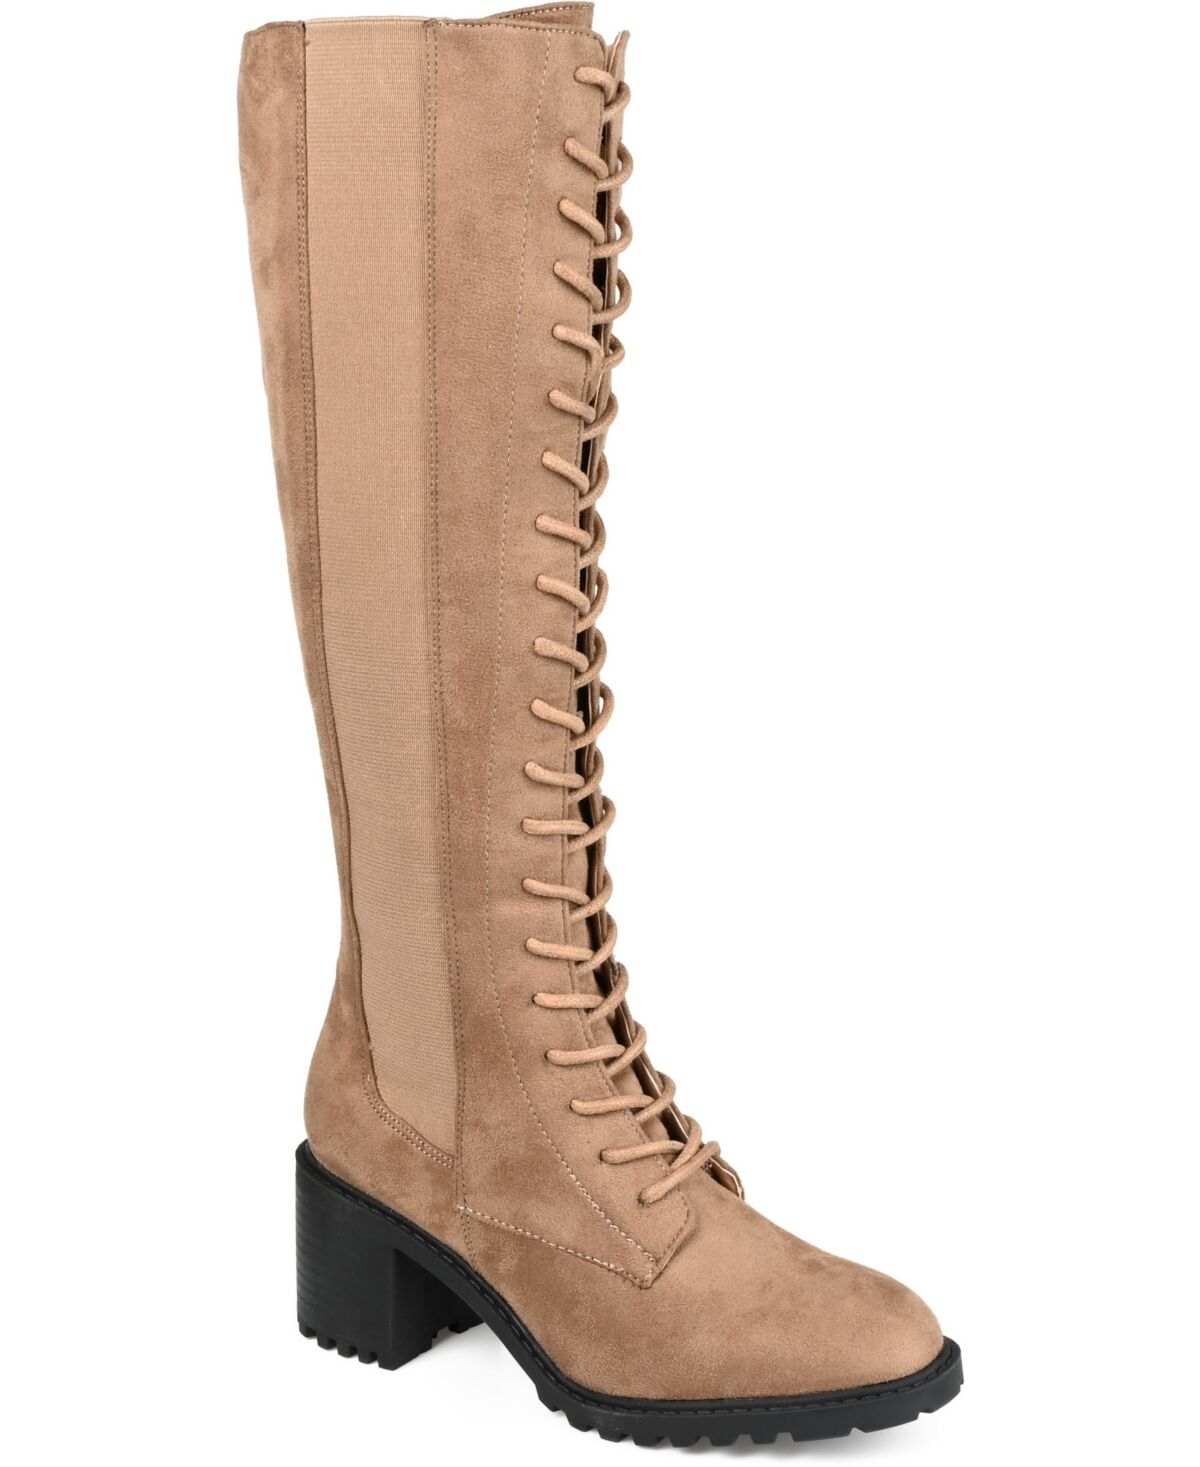 Journee Collection Women's Jenicca Extra Wide Calf Lace Up Boots - Taupe